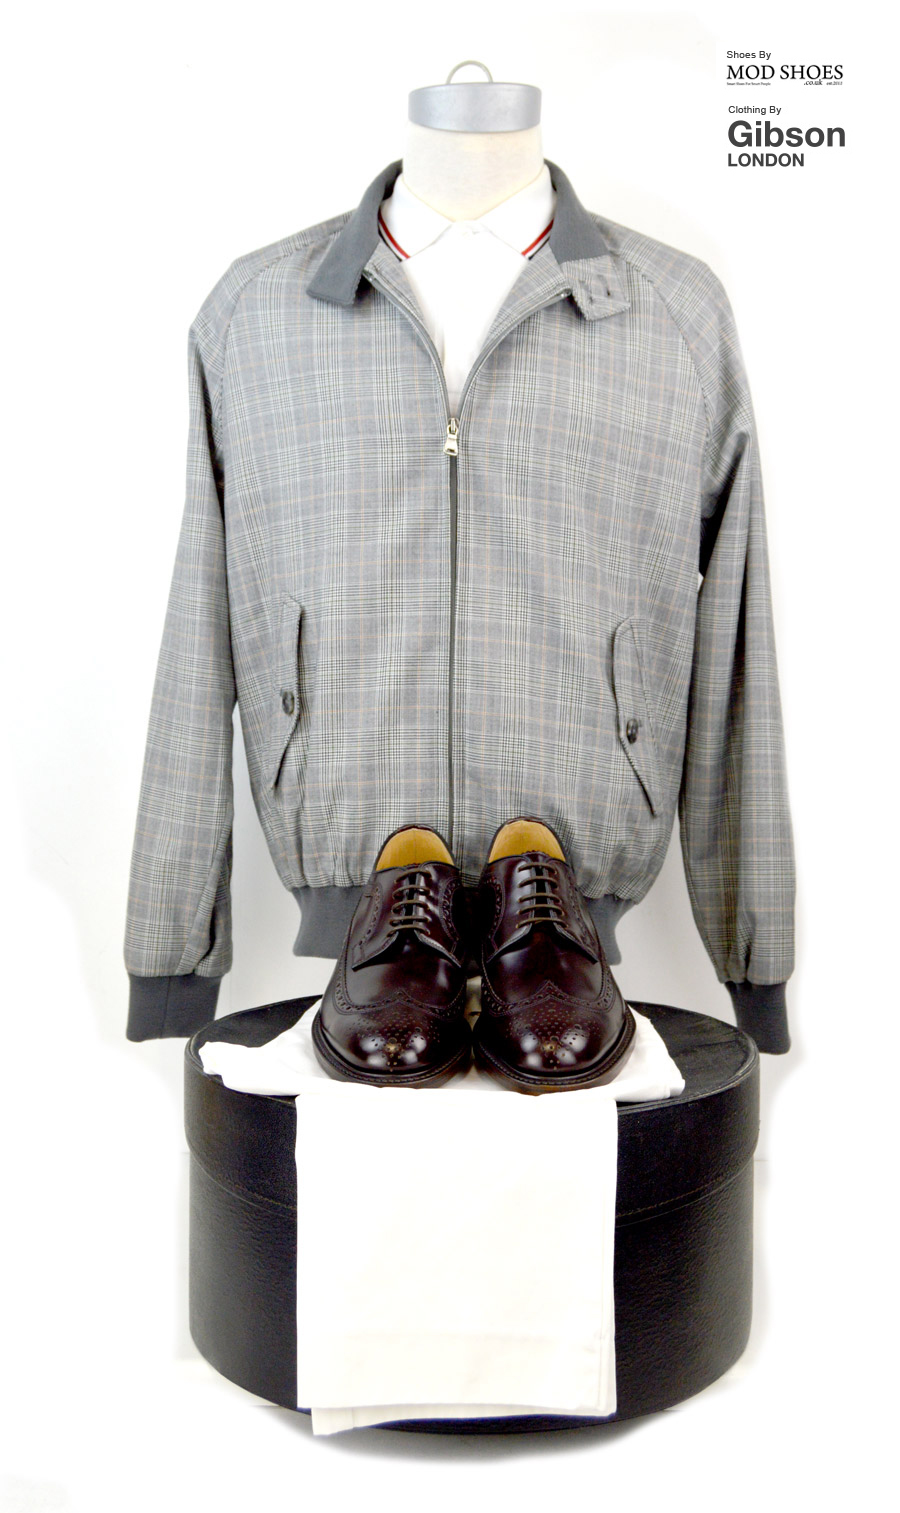 Modshoes-Oxblood-Royal-Brogues-with-Prince-of-Wales-Harrington-from-Gibson-Clothes